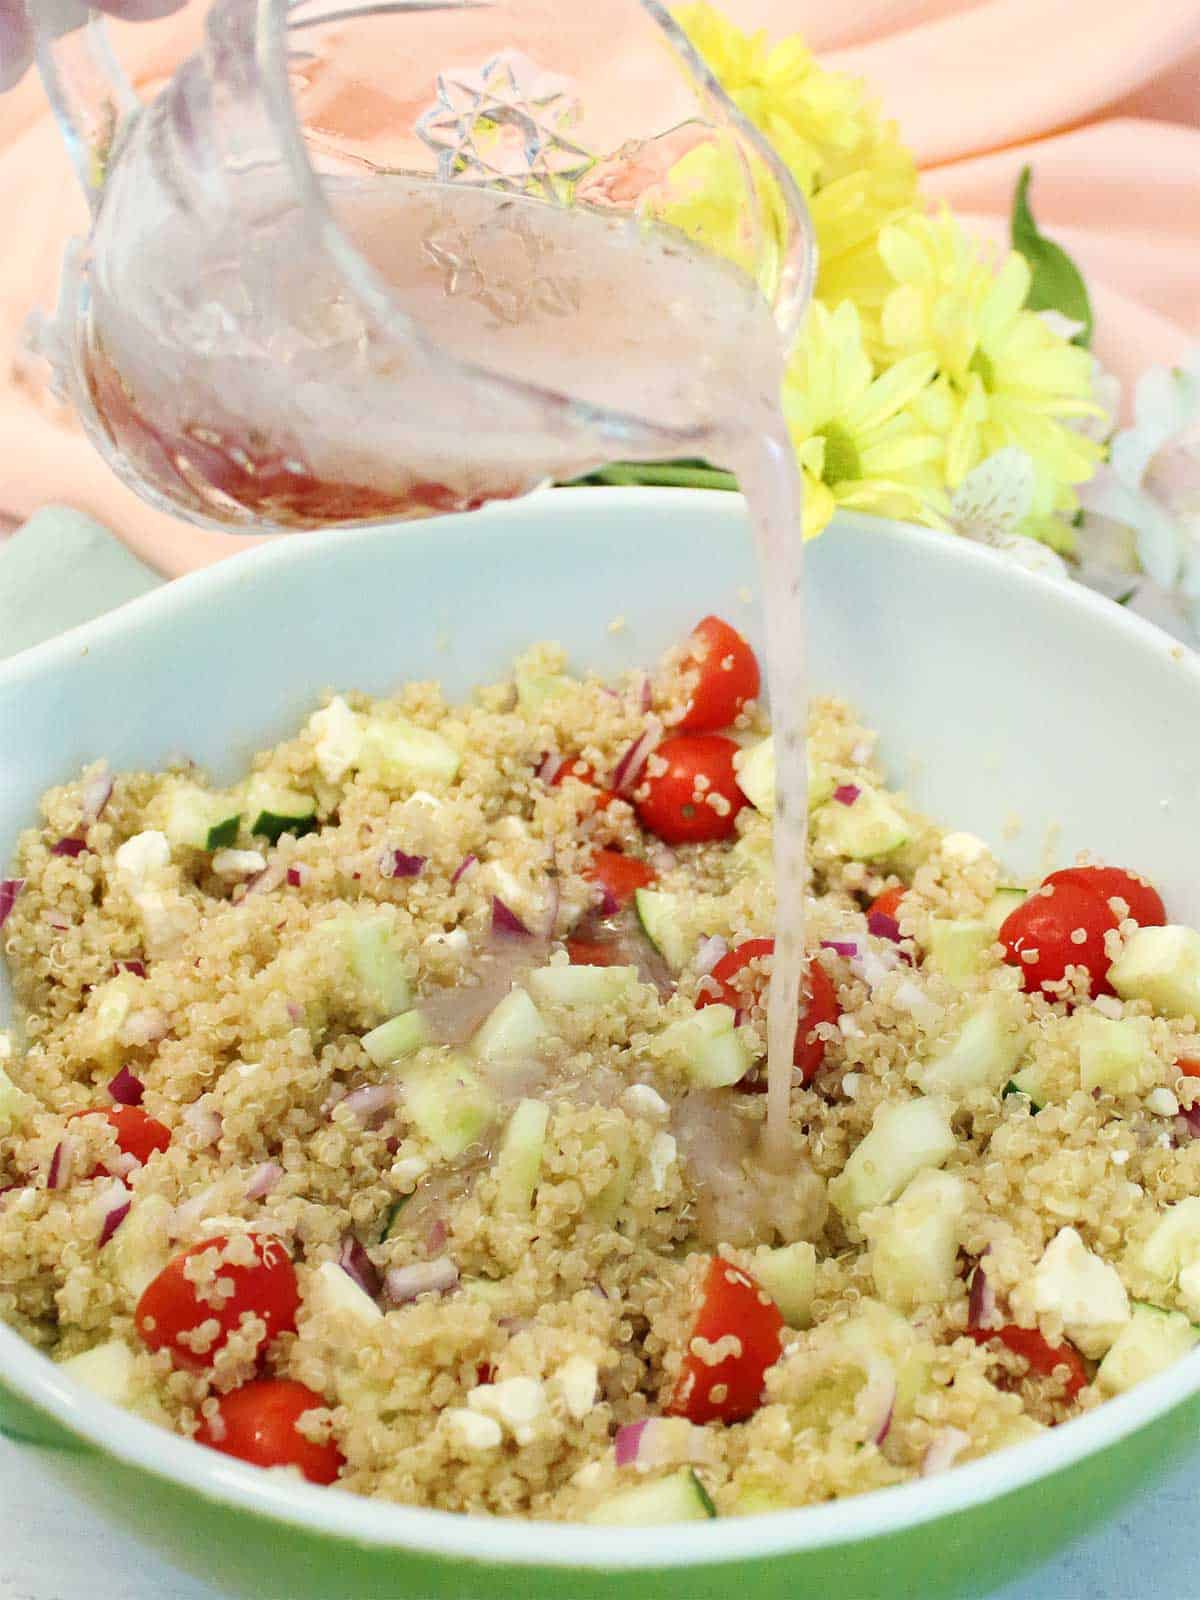 Pouring dressing on quinoa salad.